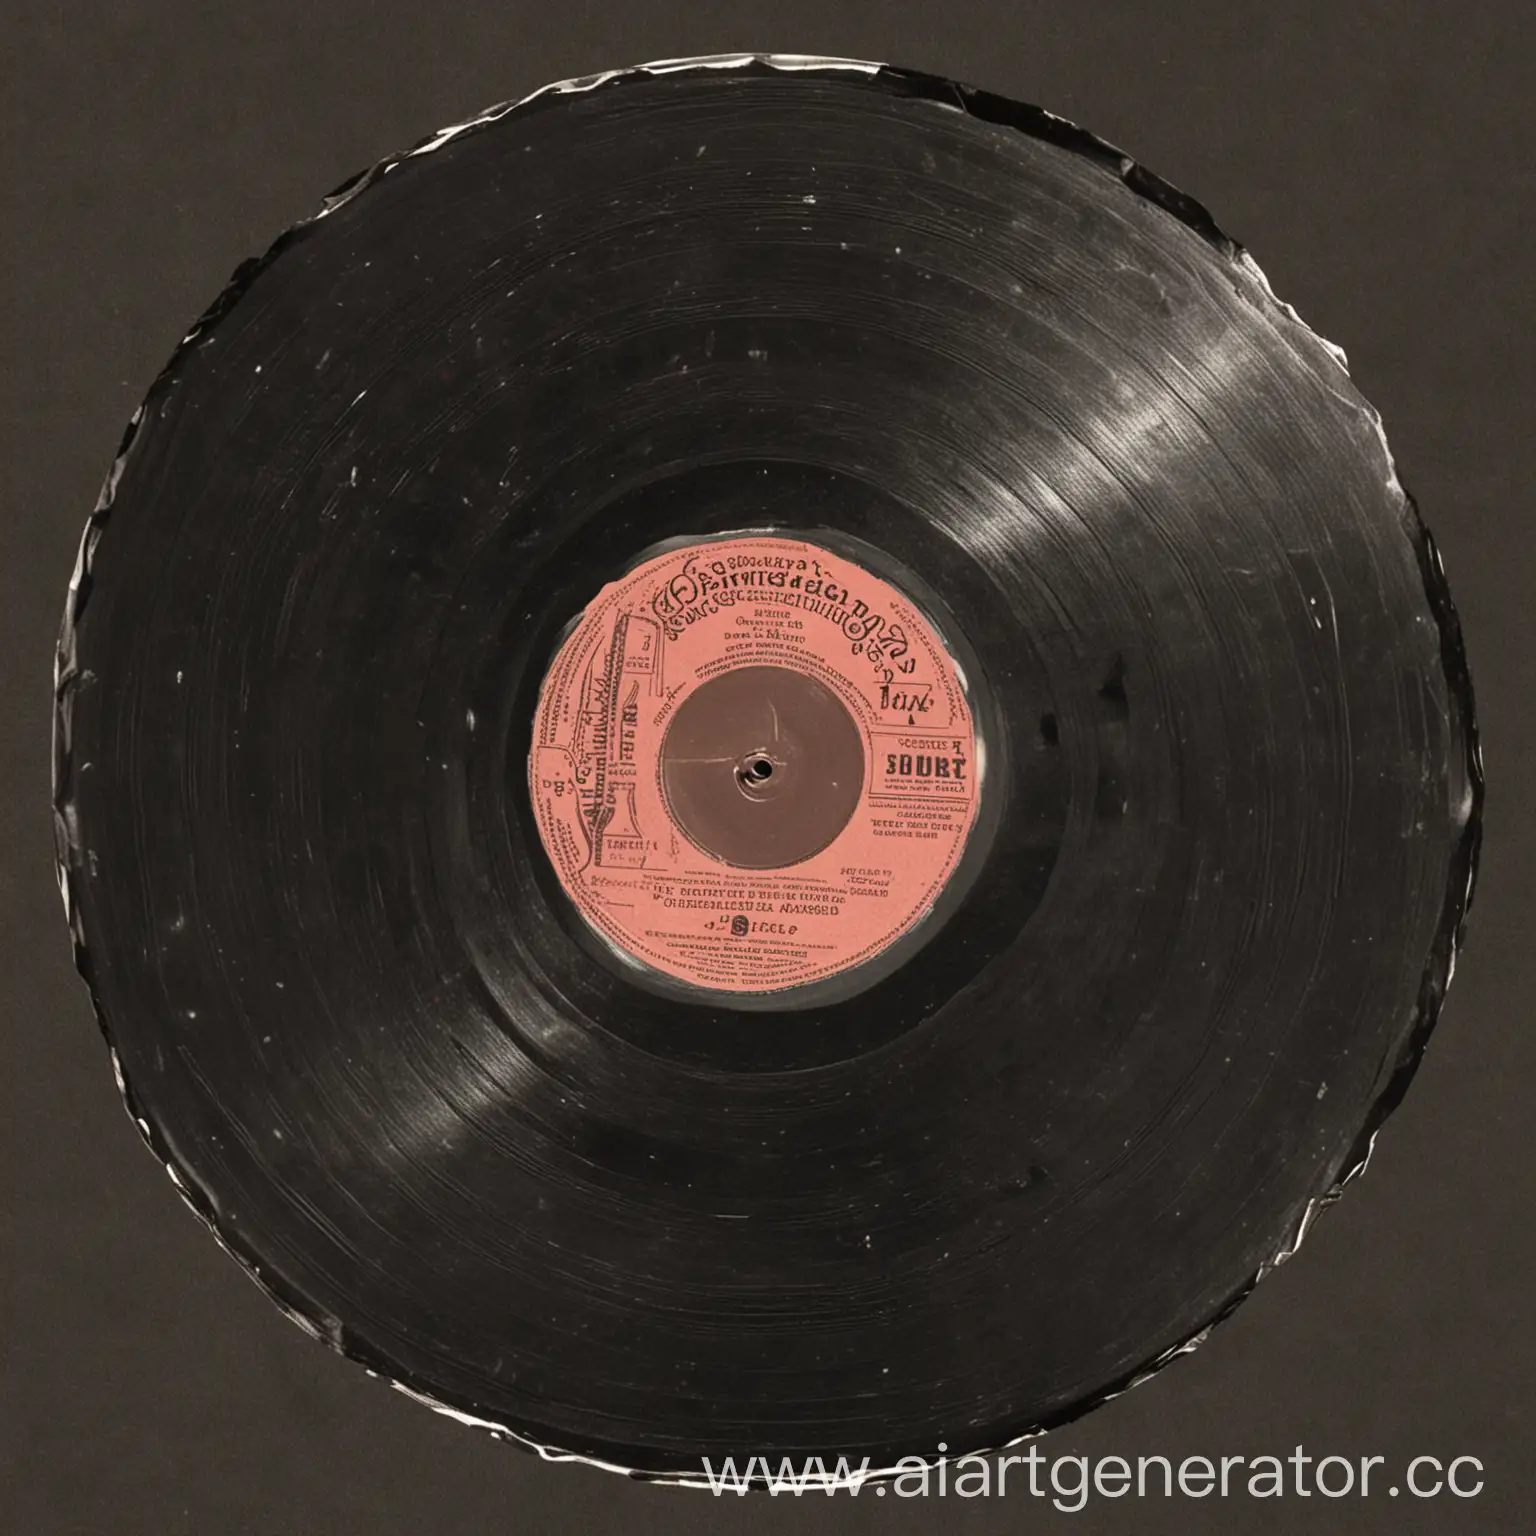 Vintage-Gramophone-Record-on-Wooden-Table